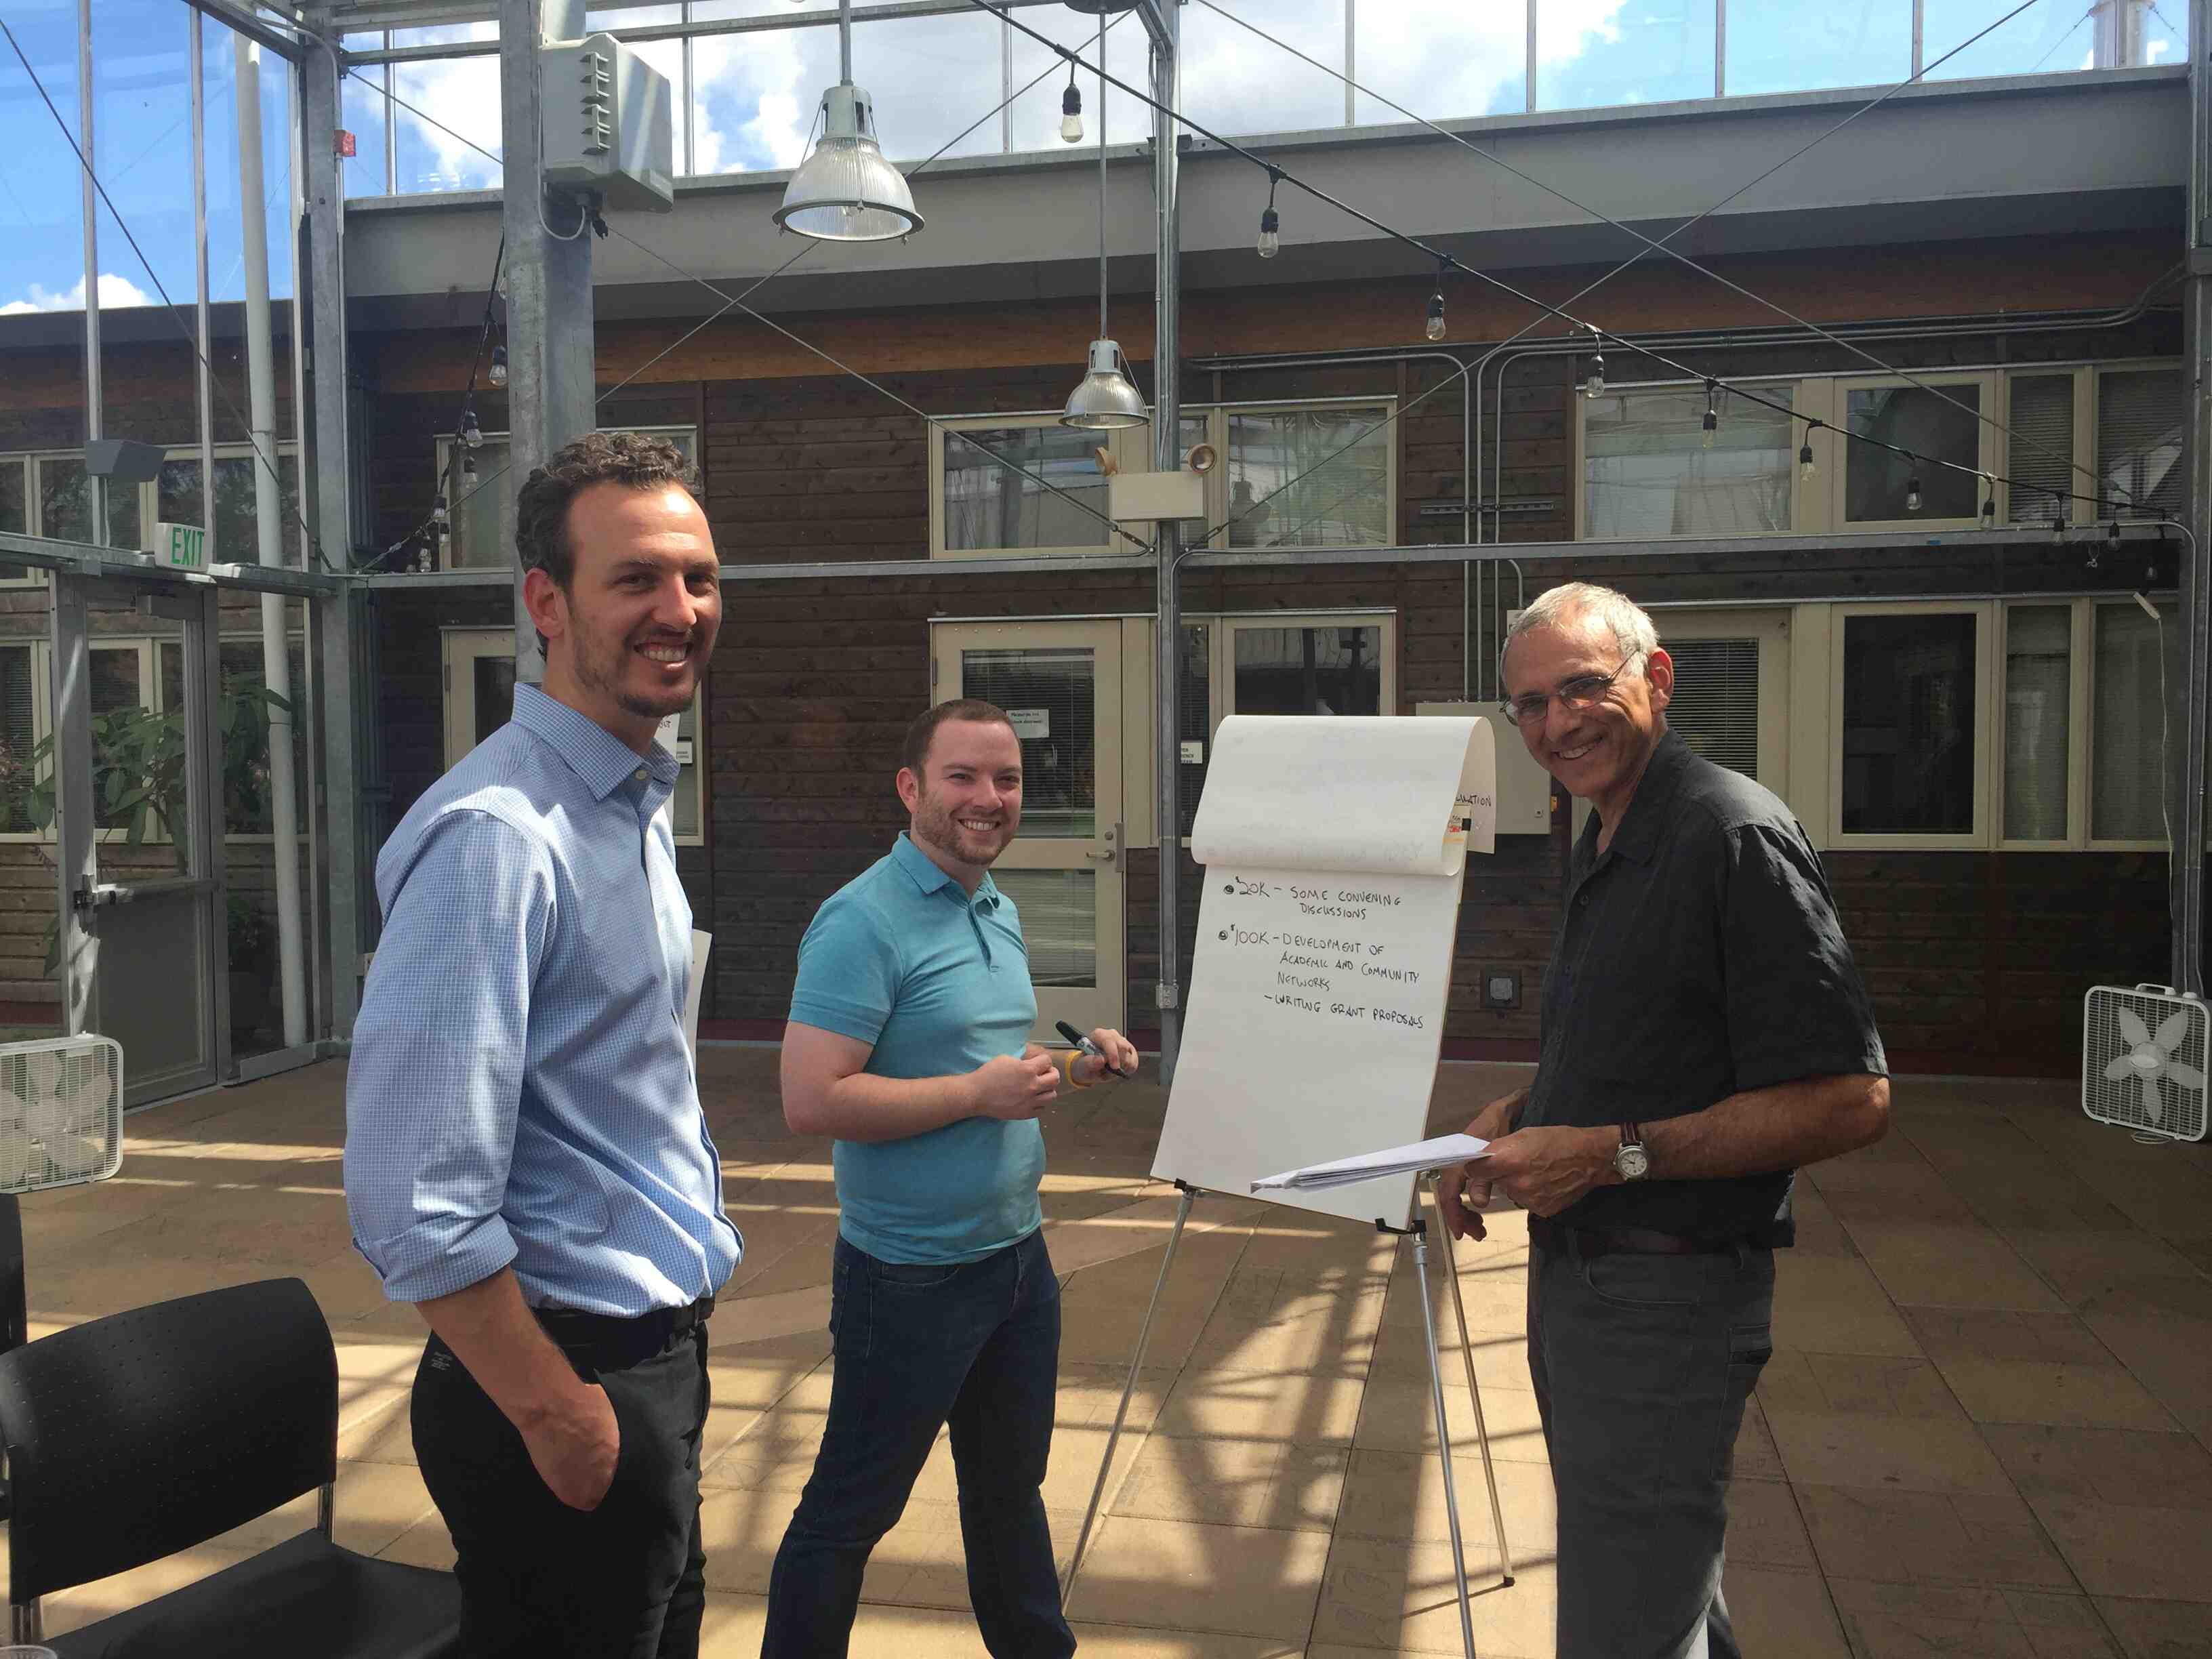 Three men smile at the camera while working on a flipchart.